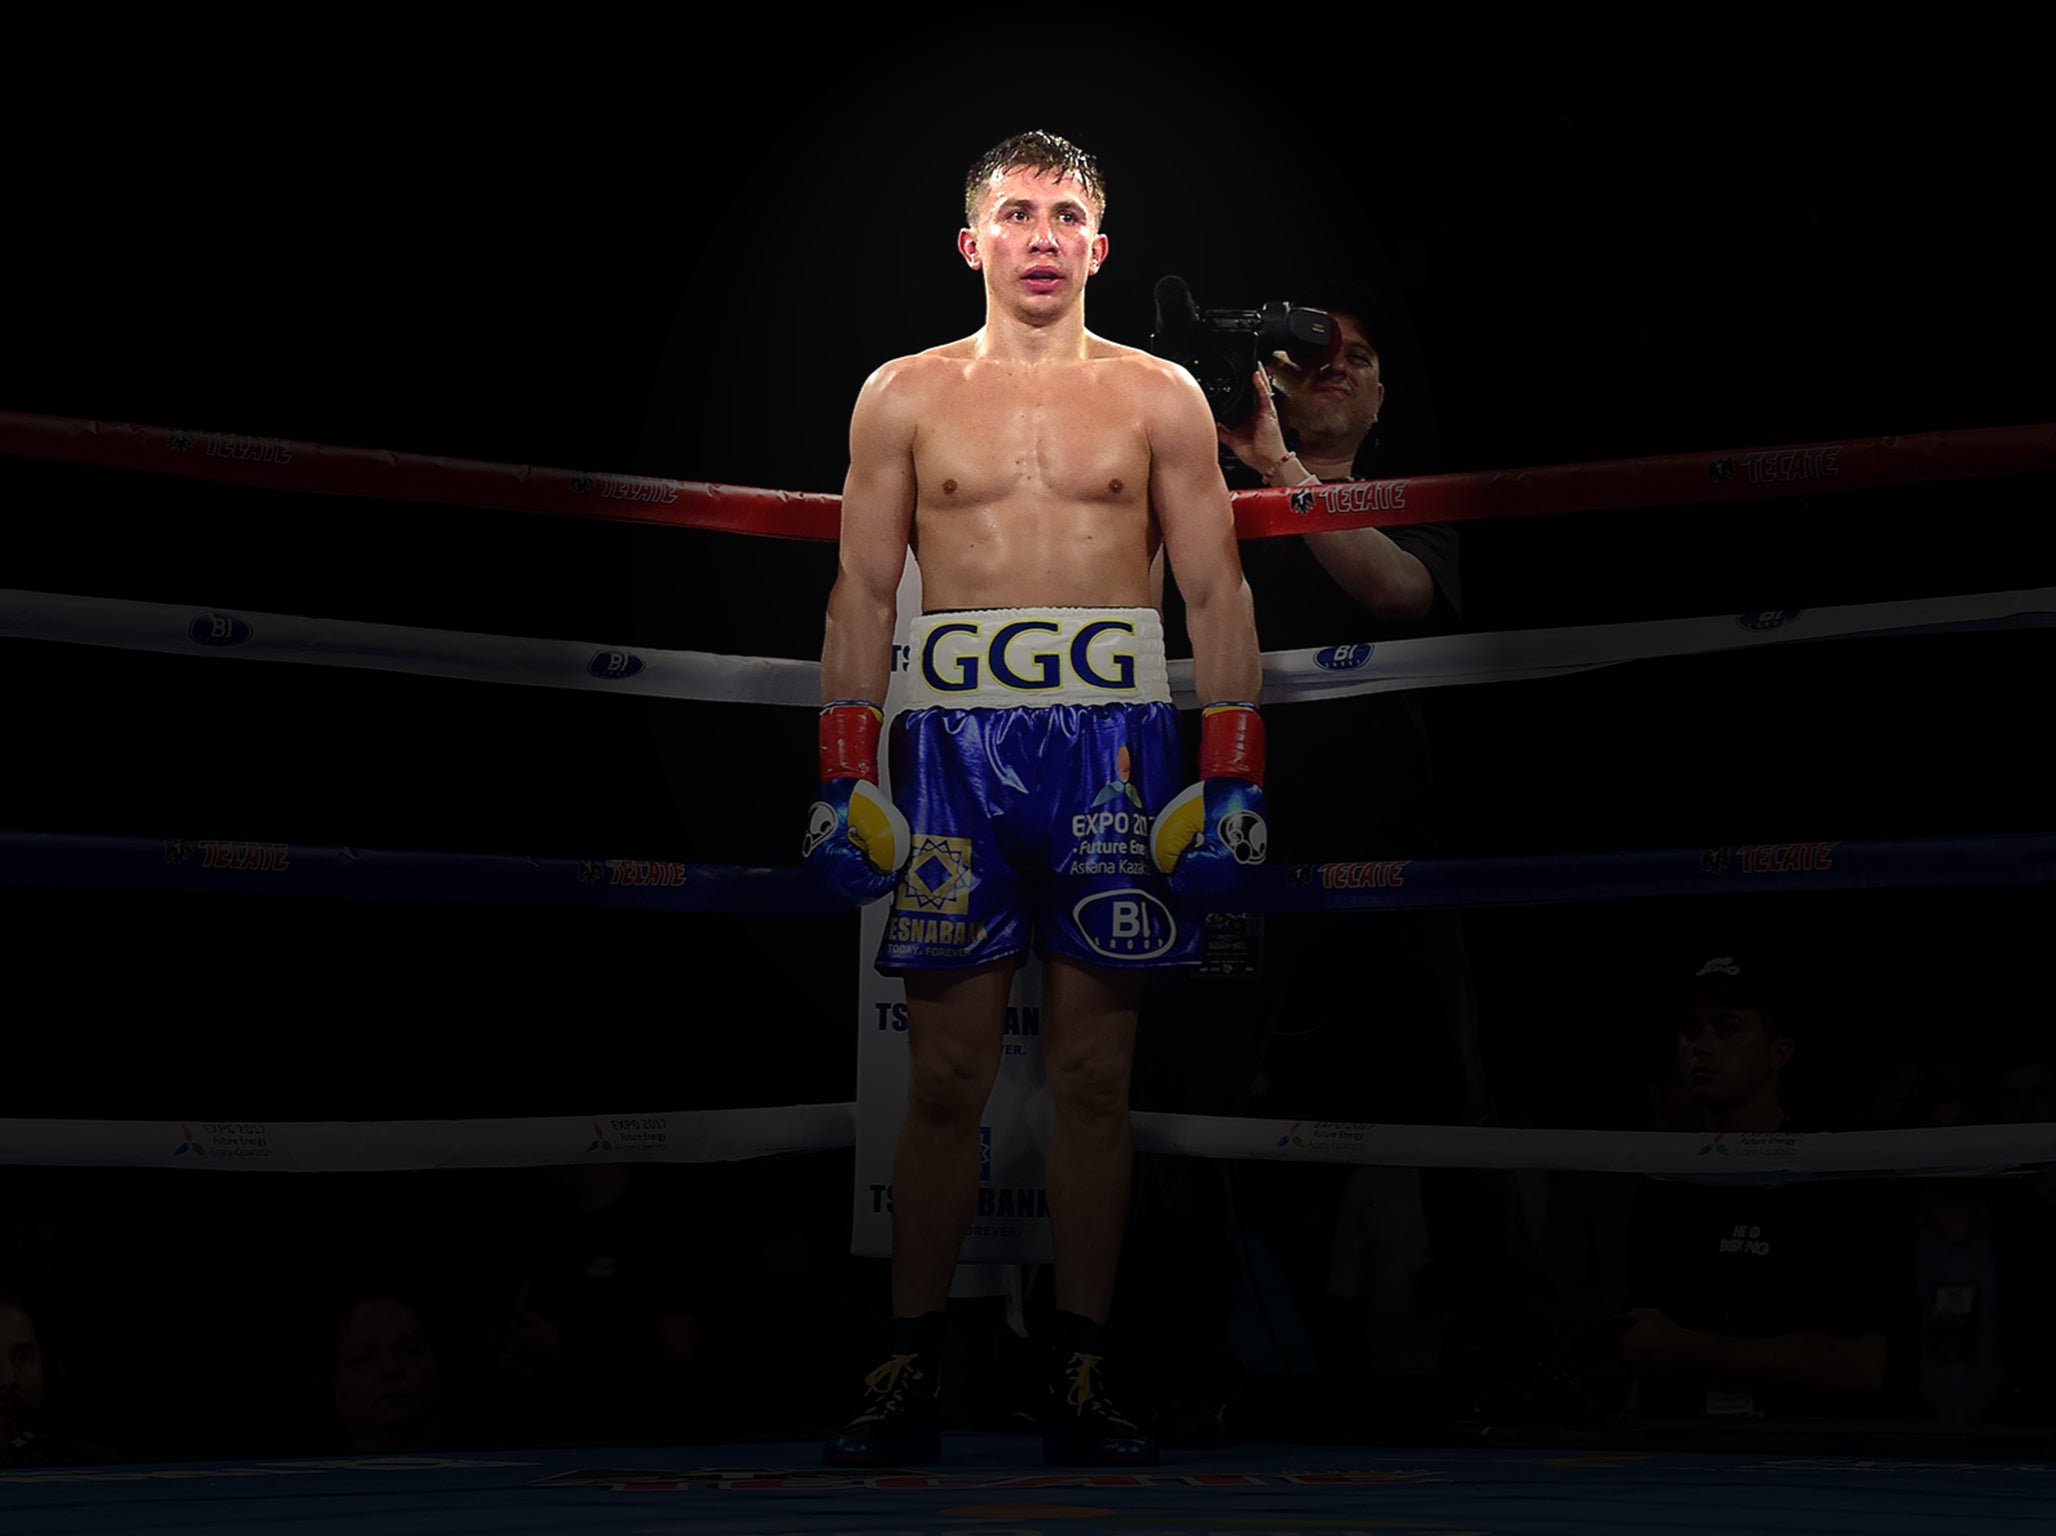 Golovkin is one of the most feared fighters of his generation